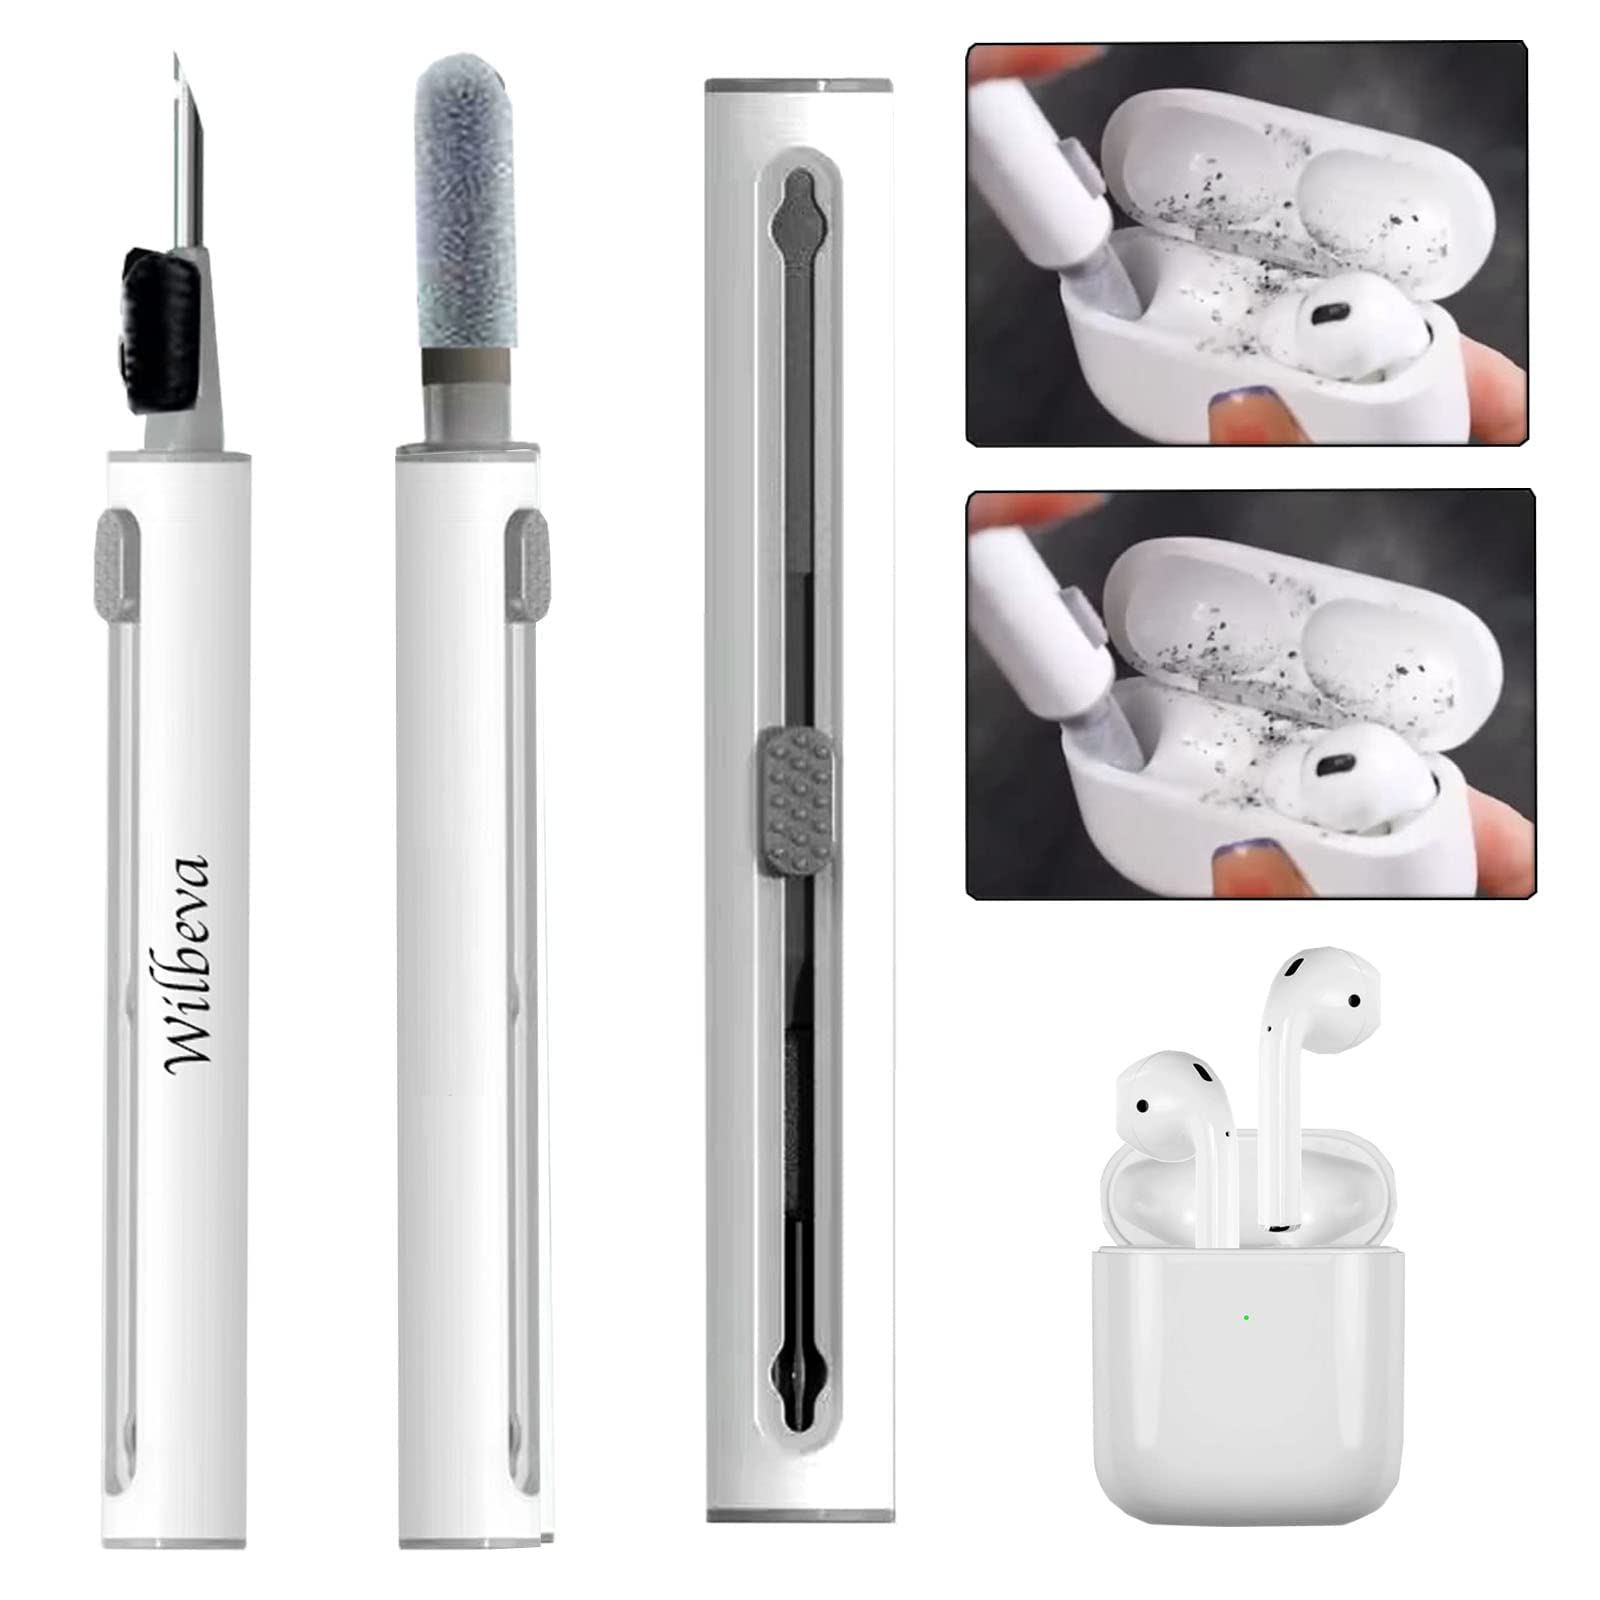 AirPods Pro maintenance tools